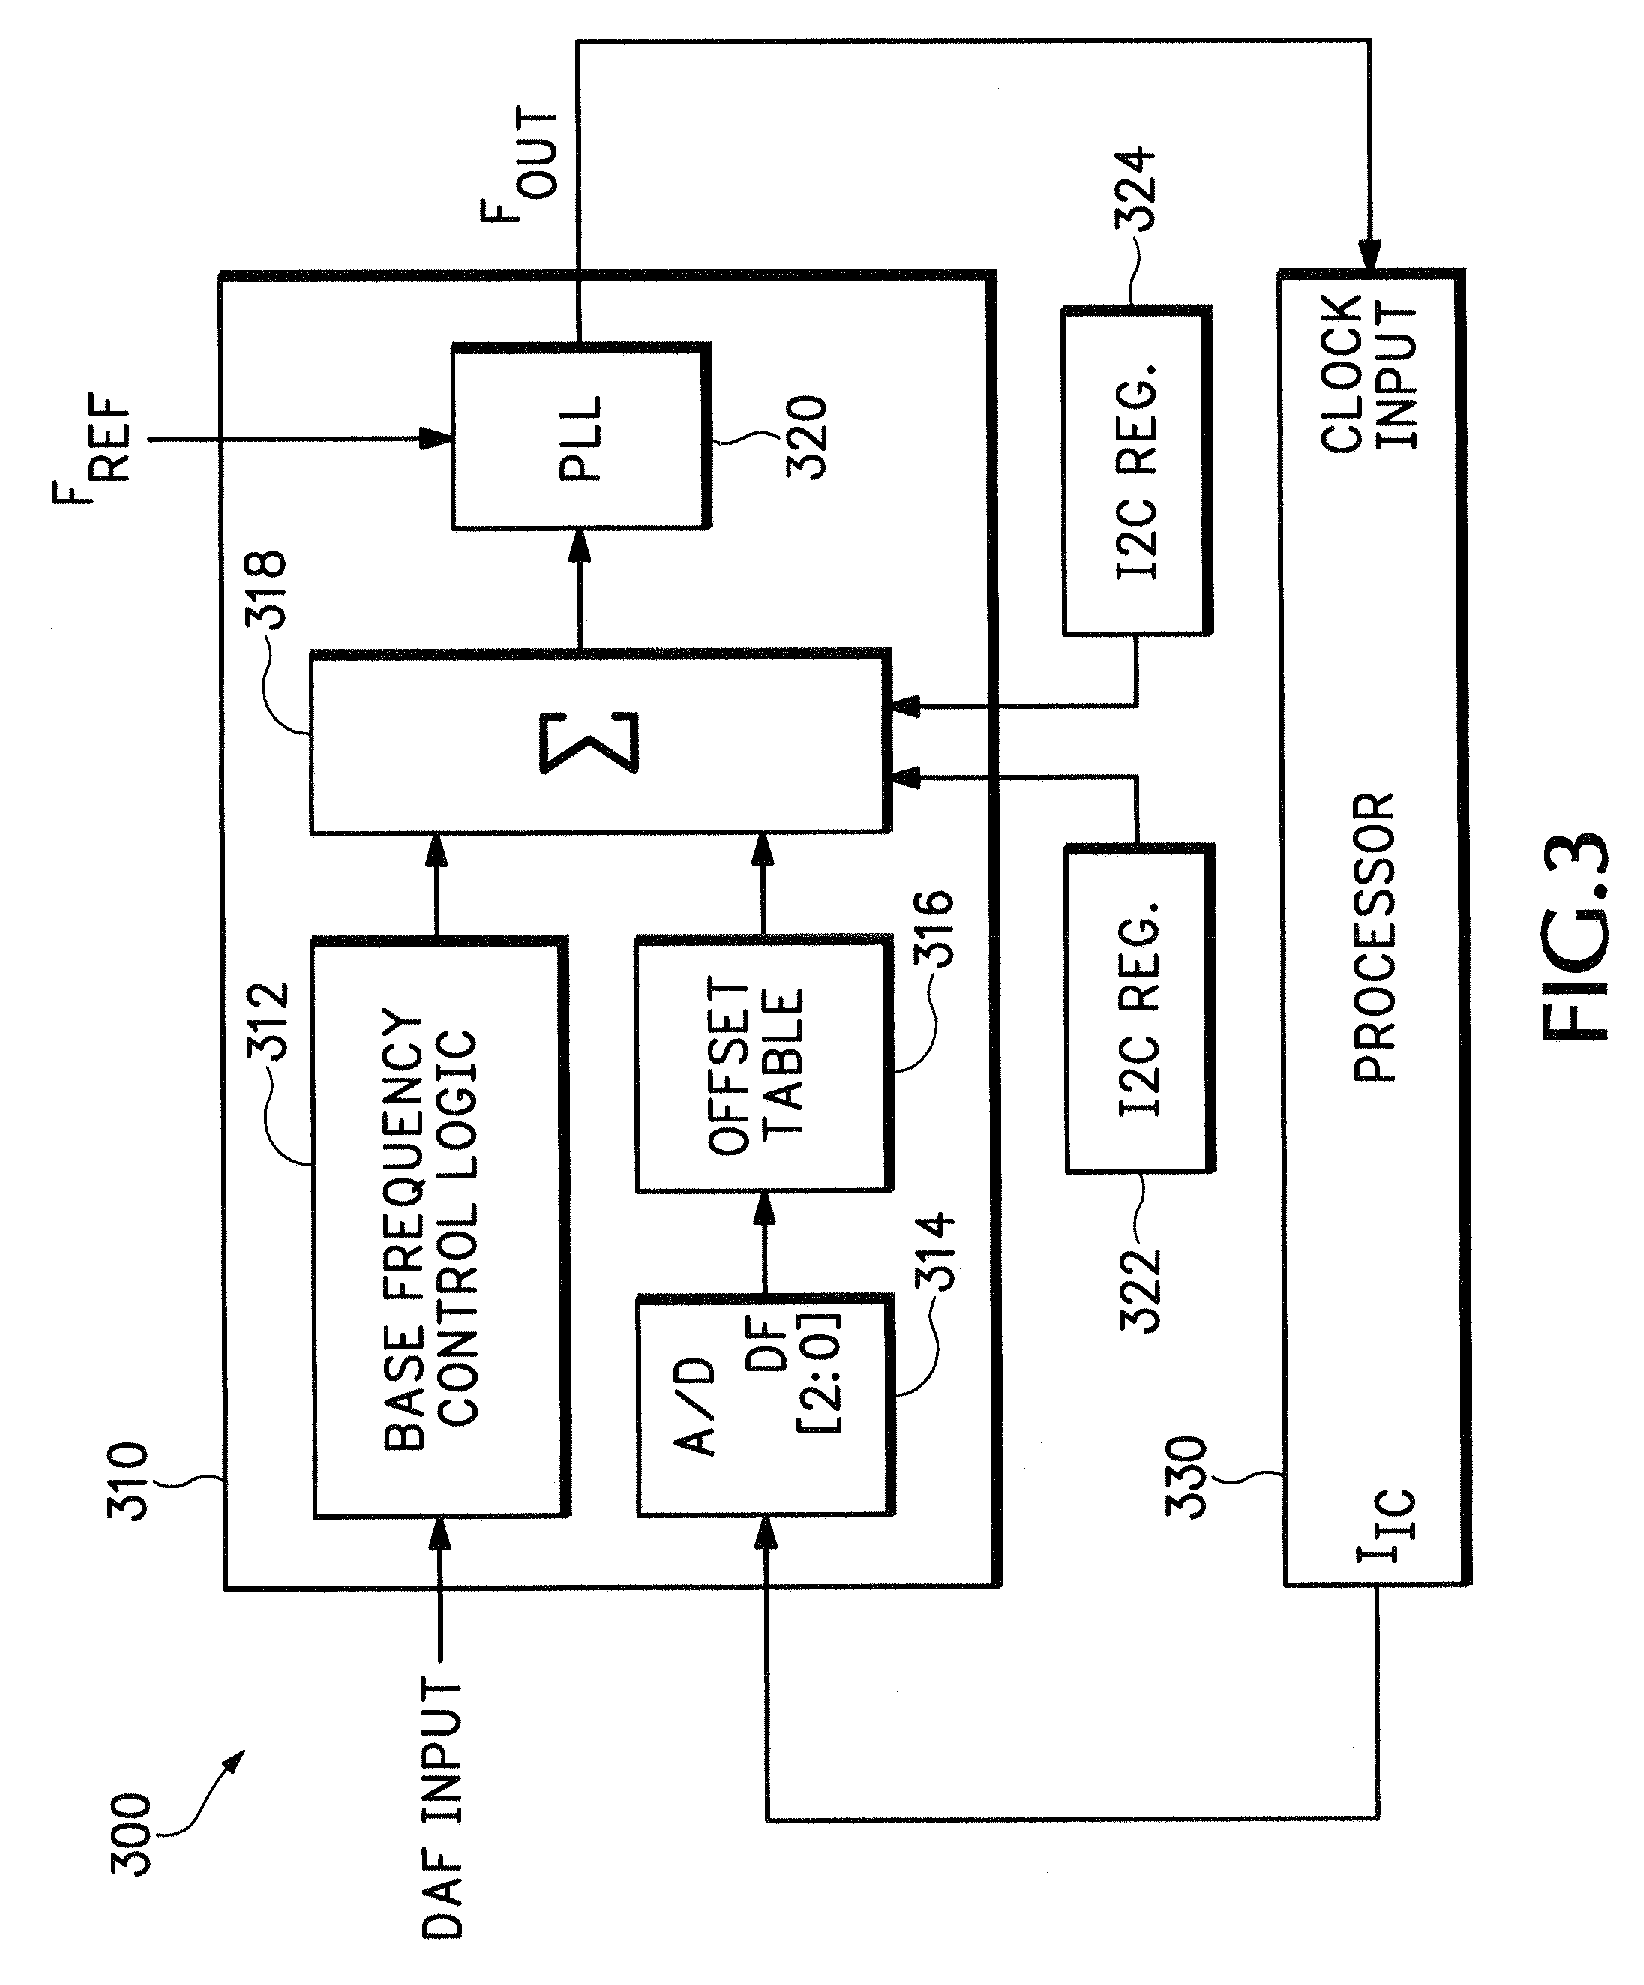 Apparatus and method for dynamic overclocking